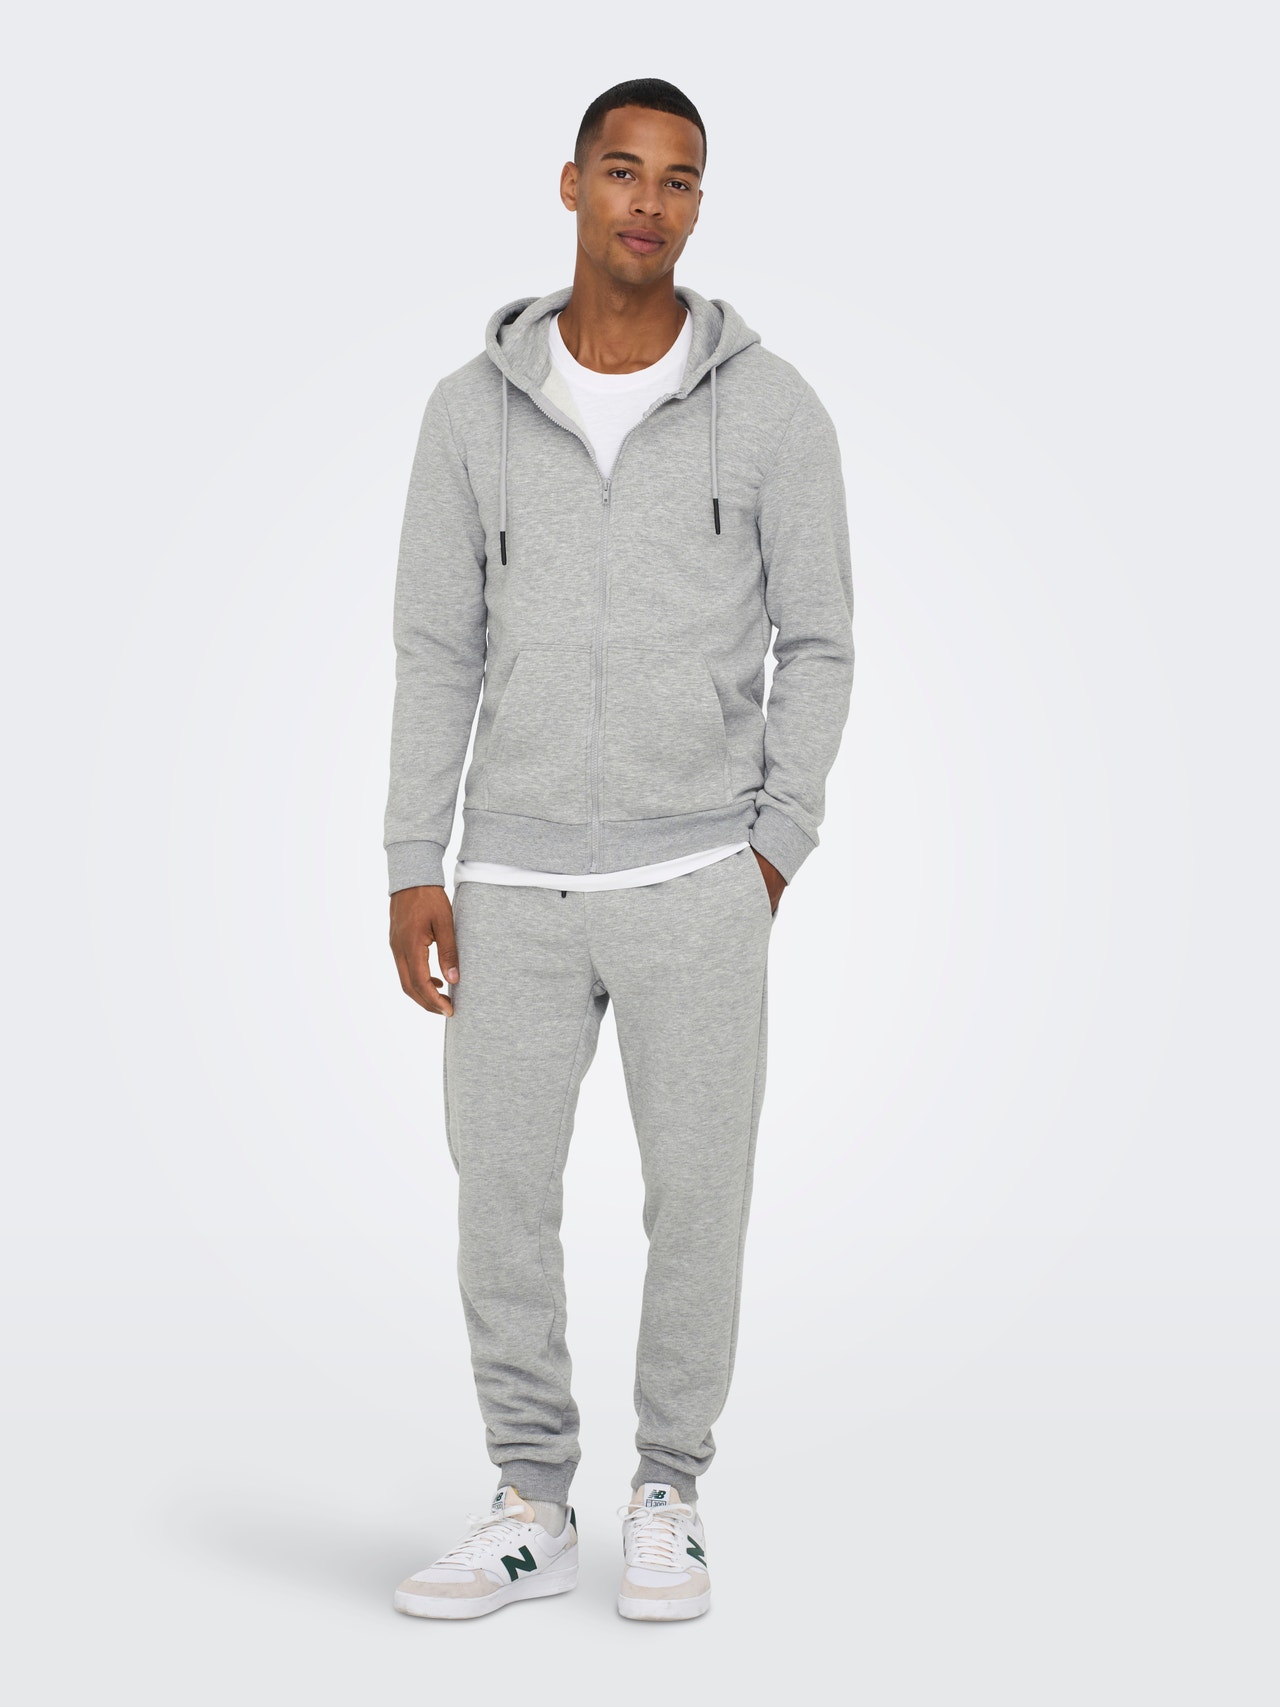 Sweat pants | Gris clair | ONLY & SONS®